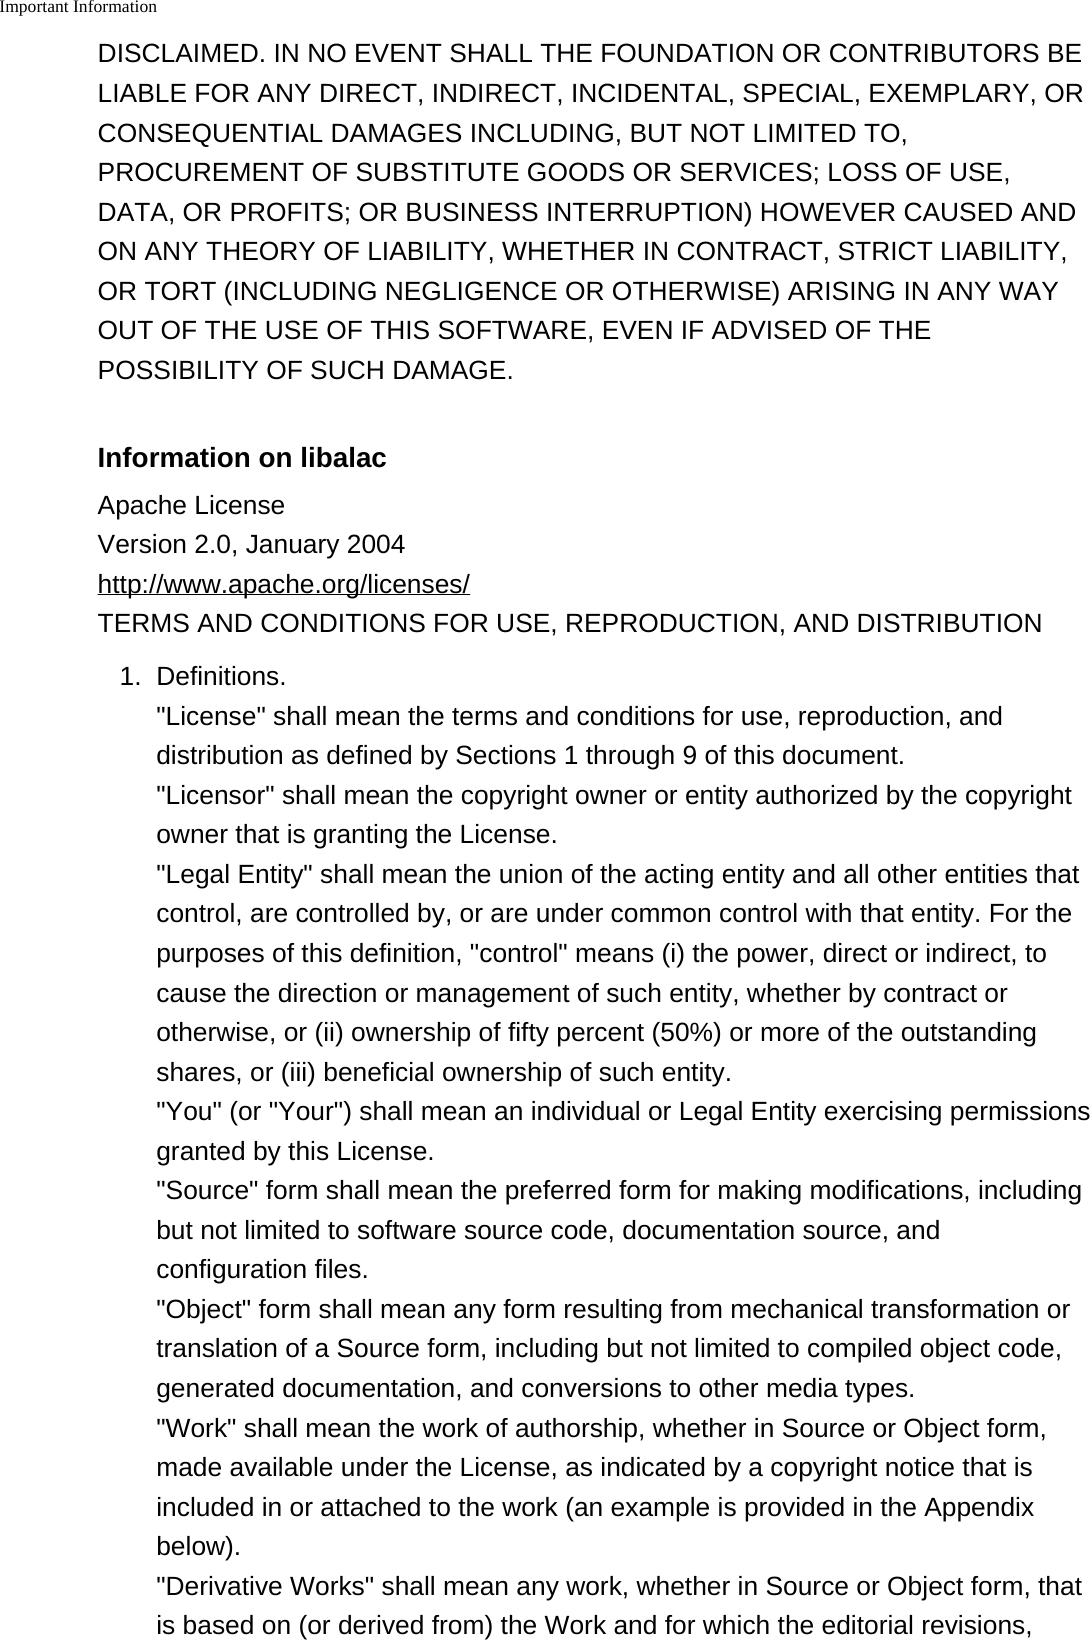 Important InformationDISCLAIMED. IN NO EVENT SHALL THE FOUNDATION OR CONTRIBUTORS BELIABLE FOR ANY DIRECT, INDIRECT, INCIDENTAL, SPECIAL, EXEMPLARY, ORCONSEQUENTIAL DAMAGES INCLUDING, BUT NOT LIMITED TO,PROCUREMENT OF SUBSTITUTE GOODS OR SERVICES; LOSS OF USE,DATA, OR PROFITS; OR BUSINESS INTERRUPTION) HOWEVER CAUSED ANDON ANY THEORY OF LIABILITY, WHETHER IN CONTRACT, STRICT LIABILITY,OR TORT (INCLUDING NEGLIGENCE OR OTHERWISE) ARISING IN ANY WAYOUT OF THE USE OF THIS SOFTWARE, EVEN IF ADVISED OF THEPOSSIBILITY OF SUCH DAMAGE.Information on libalacApache LicenseVersion 2.0, January 2004http://www.apache.org/licenses/TERMS AND CONDITIONS FOR USE, REPRODUCTION, AND DISTRIBUTION1. Definitions.&quot;License&quot; shall mean the terms and conditions for use, reproduction, anddistribution as defined by Sections 1 through 9 of this document.&quot;Licensor&quot; shall mean the copyright owner or entity authorized by the copyrightowner that is granting the License.&quot;Legal Entity&quot; shall mean the union of the acting entity and all other entities thatcontrol, are controlled by, or are under common control with that entity. For thepurposes of this definition, &quot;control&quot; means (i) the power, direct or indirect, tocause the direction or management of such entity, whether by contract orotherwise, or (ii) ownership of fifty percent (50%) or more of the outstandingshares, or (iii) beneficial ownership of such entity.&quot;You&quot; (or &quot;Your&quot;) shall mean an individual or Legal Entity exercising permissionsgranted by this License.&quot;Source&quot; form shall mean the preferred form for making modifications, includingbut not limited to software source code, documentation source, andconfiguration files.&quot;Object&quot; form shall mean any form resulting from mechanical transformation ortranslation of a Source form, including but not limited to compiled object code,generated documentation, and conversions to other media types.&quot;Work&quot; shall mean the work of authorship, whether in Source or Object form,made available under the License, as indicated by a copyright notice that isincluded in or attached to the work (an example is provided in the Appendixbelow).&quot;Derivative Works&quot; shall mean any work, whether in Source or Object form, thatis based on (or derived from) the Work and for which the editorial revisions,